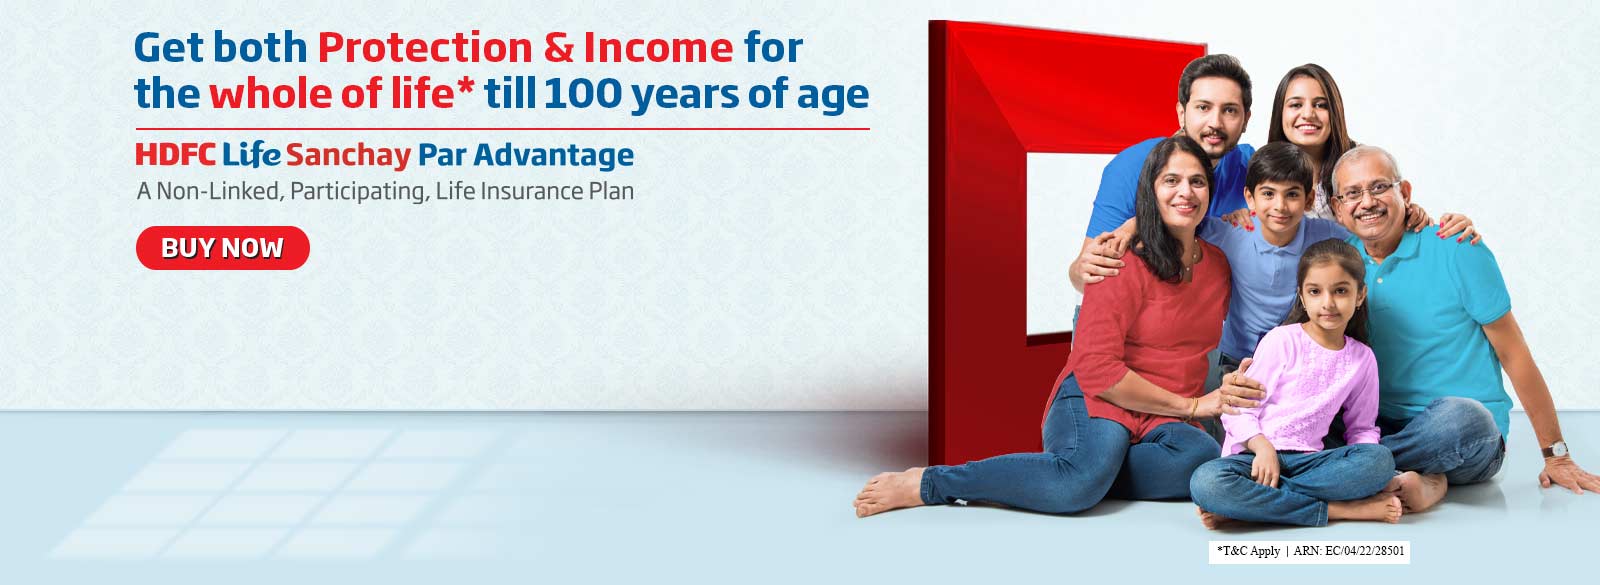 Hdfc Life Insurance Online Life Insurance Plans And Policies In India 4256